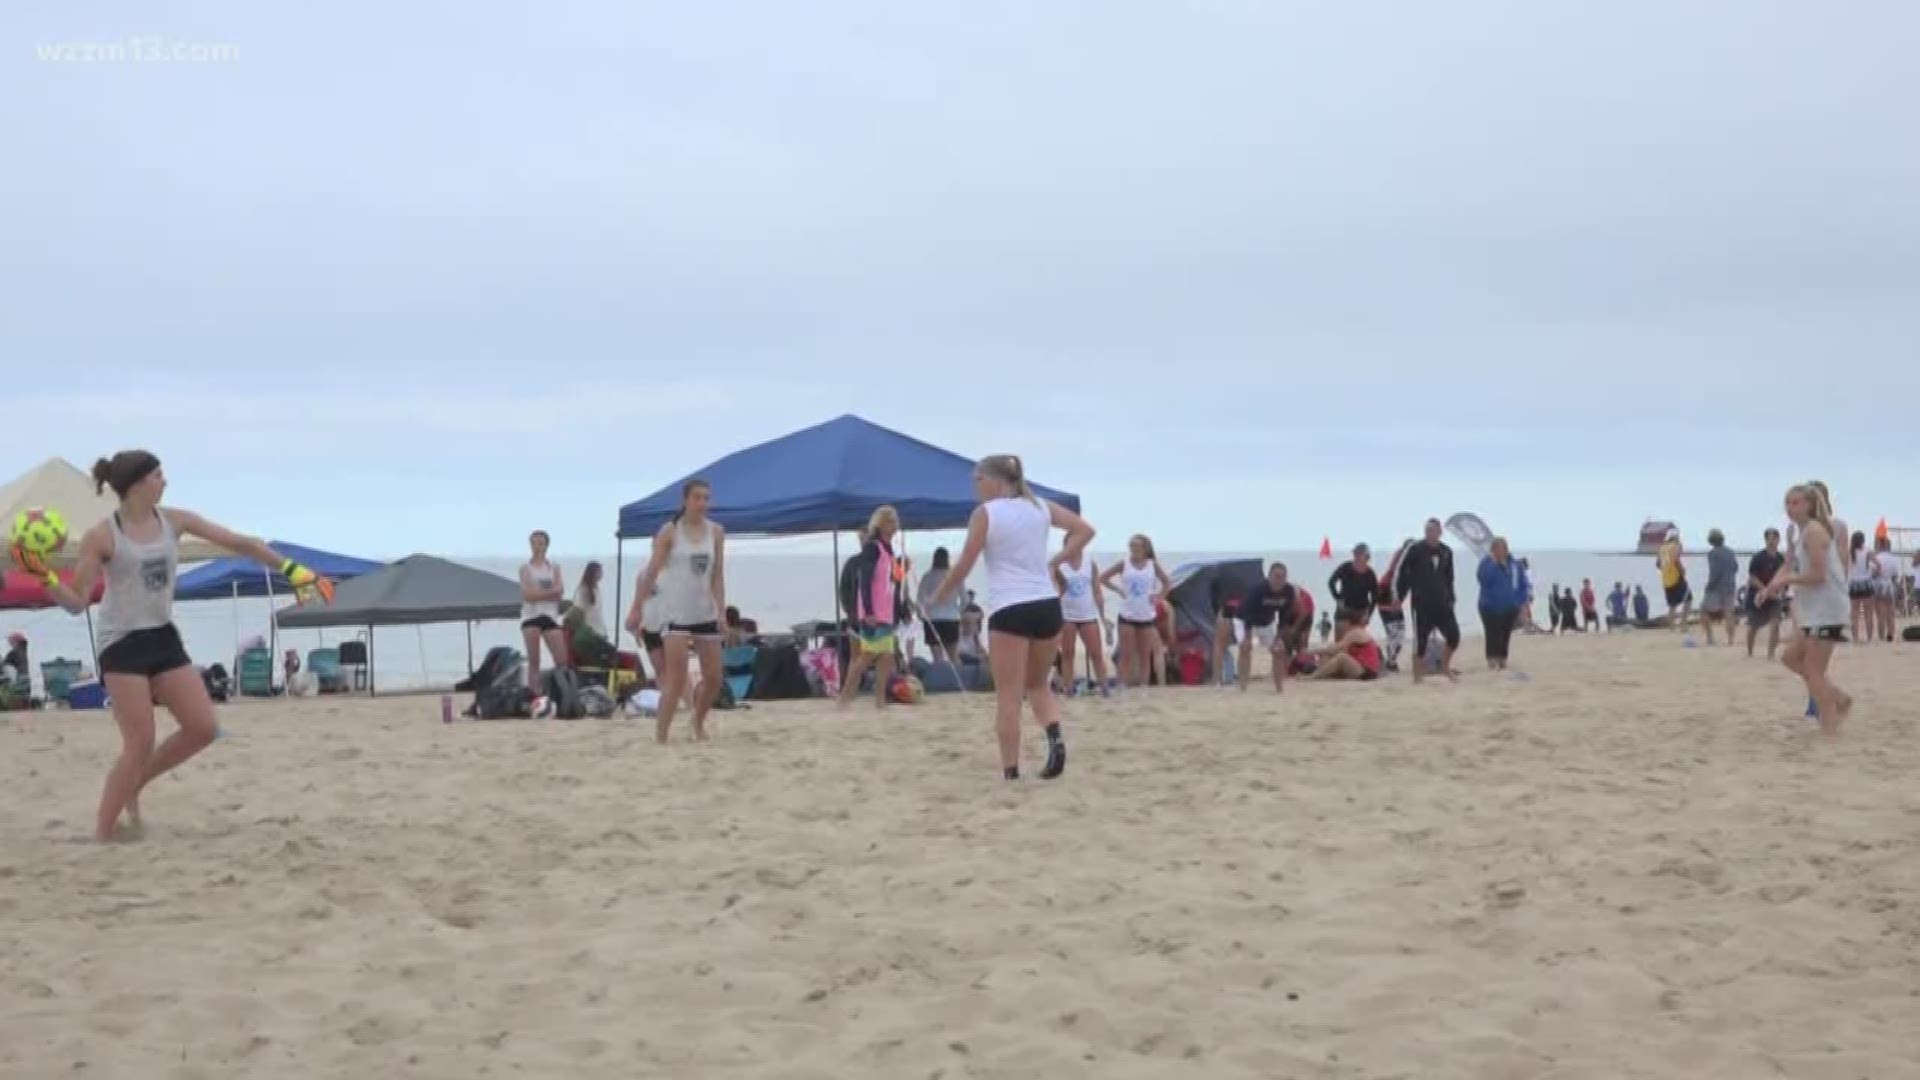 Soccer in the Sand held in Grand Haven